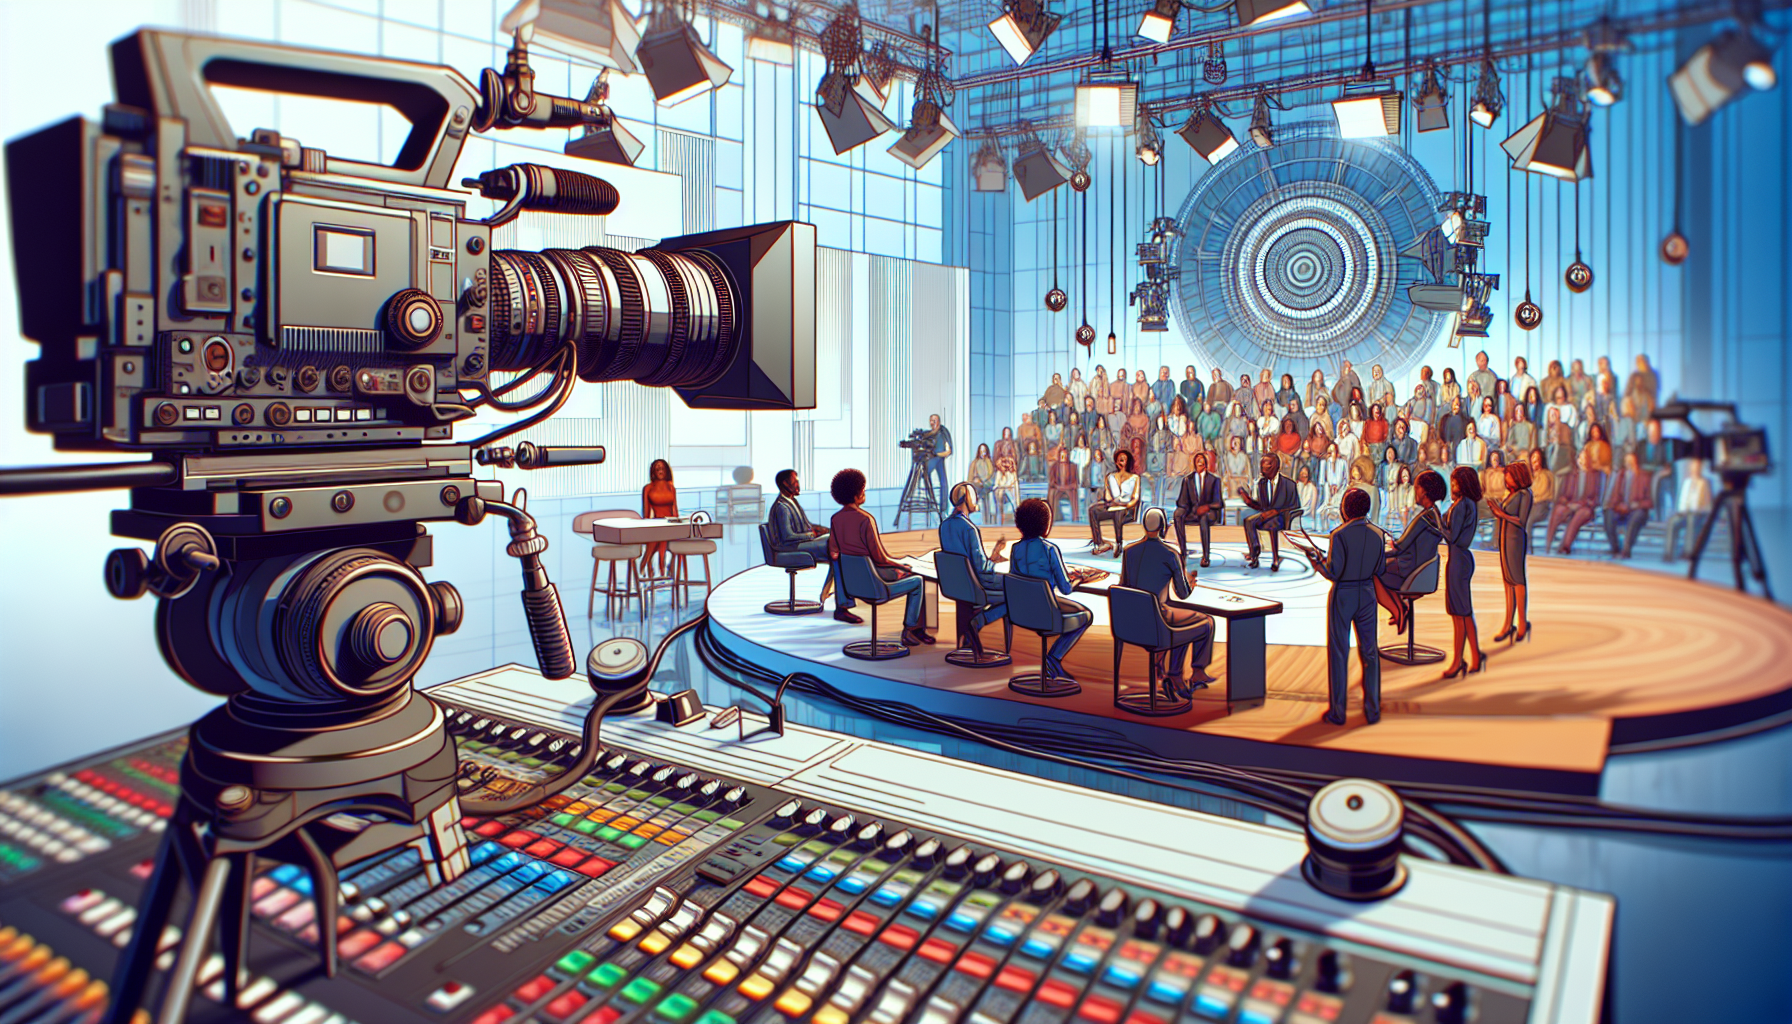 An image of a modern television studio bustling with activity, featuring the new ARRI ALEXA 35 camera mounted on a professional tripod front and center, with crew members operating various broadcast e